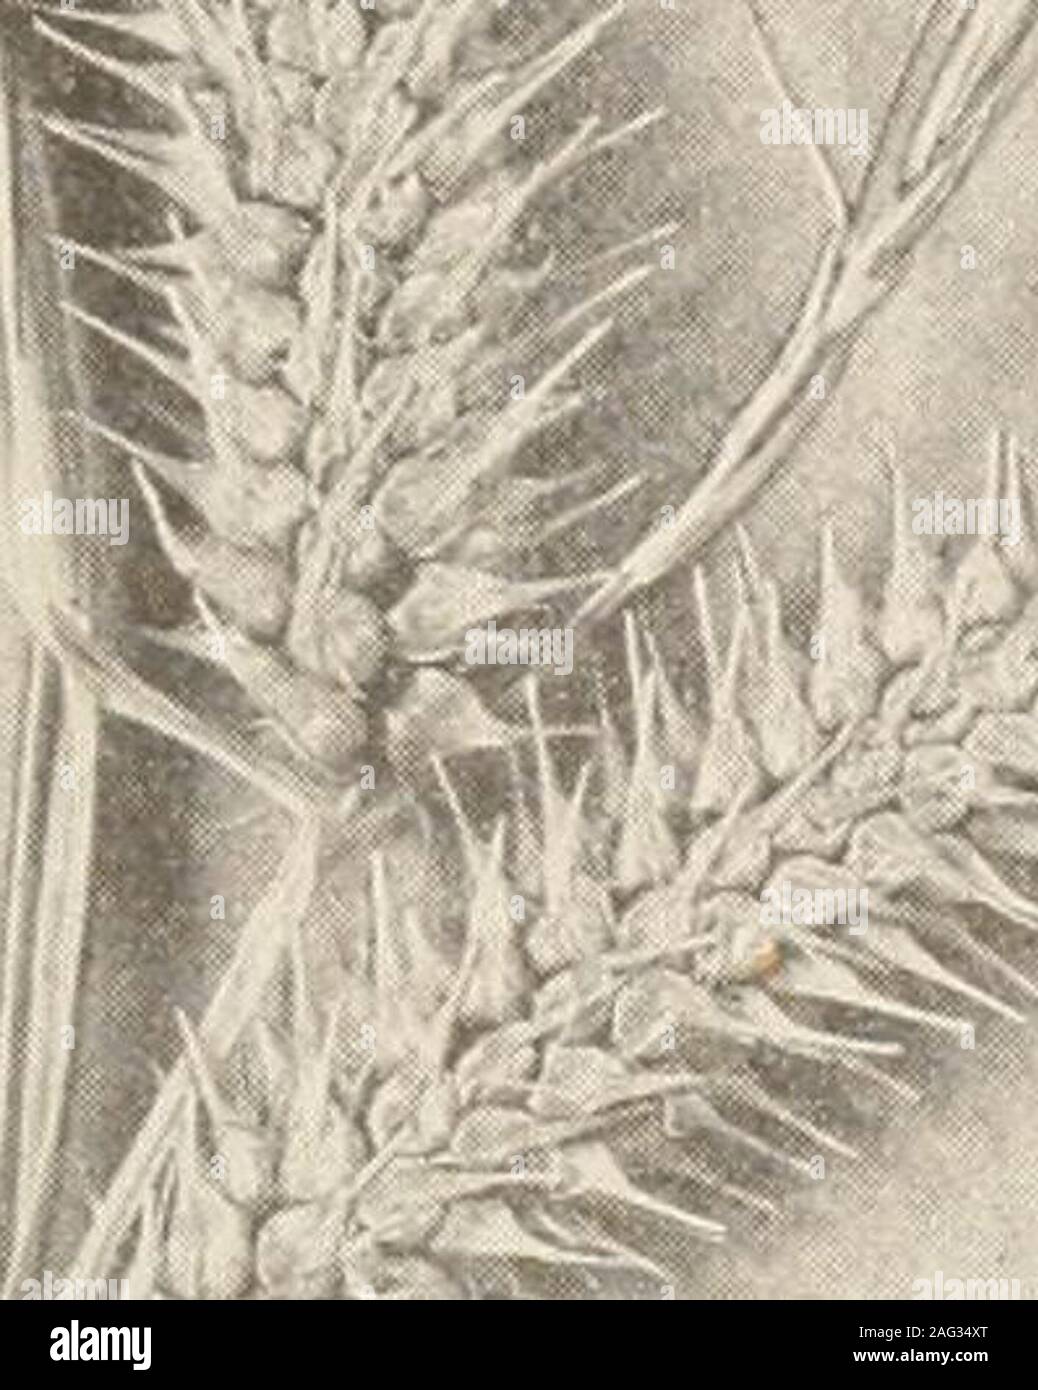 . The plants of southern New Jersey; with especial reference to the flora of the pine barrens and the geographic distribution of the species. Original Photo. N^t si^g  SEDGES. 1. Carex lupulina. 4. C. folliculata. 2. C. bullata. 5. C. intumescens. 3. C. collinsii. N. J. Plants, PLATE XXIII.. Stock Photo